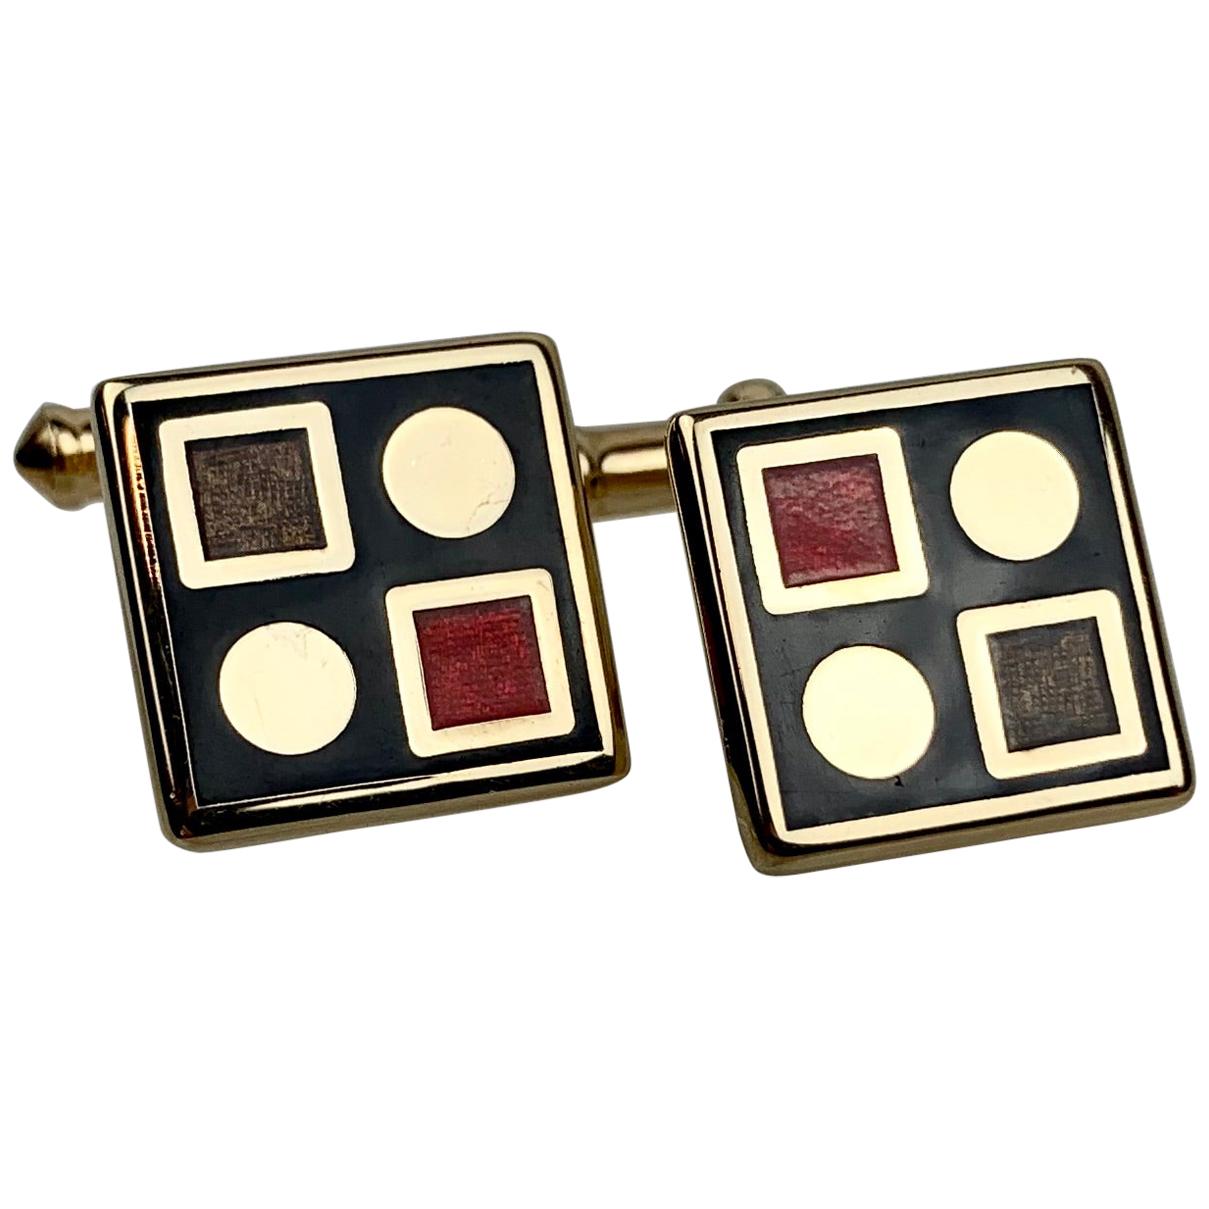 Vintage Geometric Design Cufflinks with Engine Turning and Red/Black Enamel